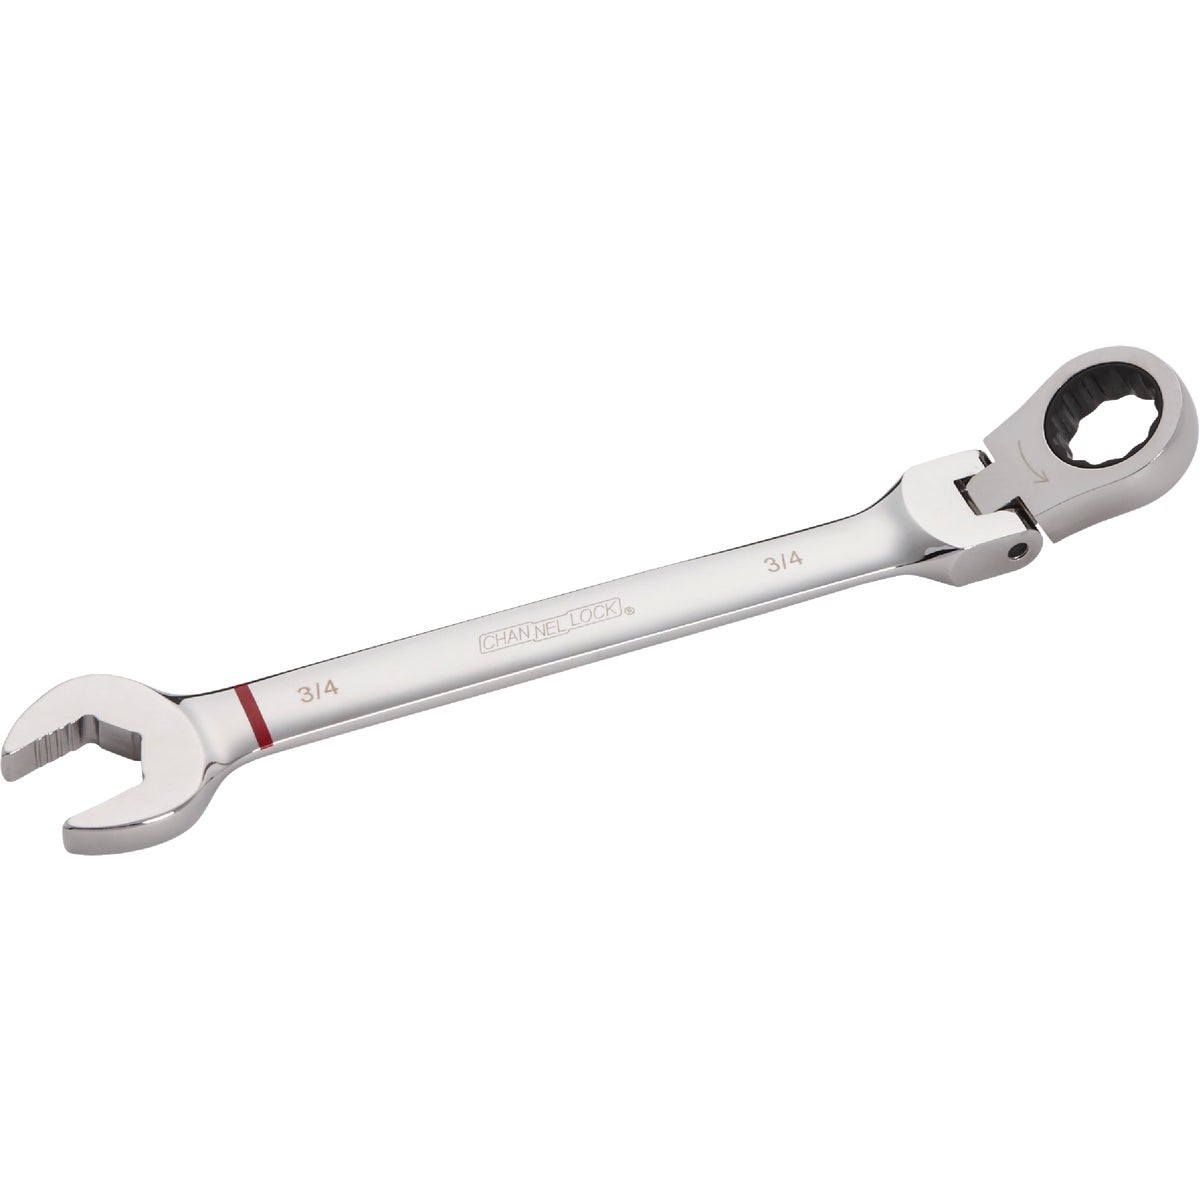 Channellock Standard 3/4 In. 12-Point Ratcheting Flex-Head Wrench